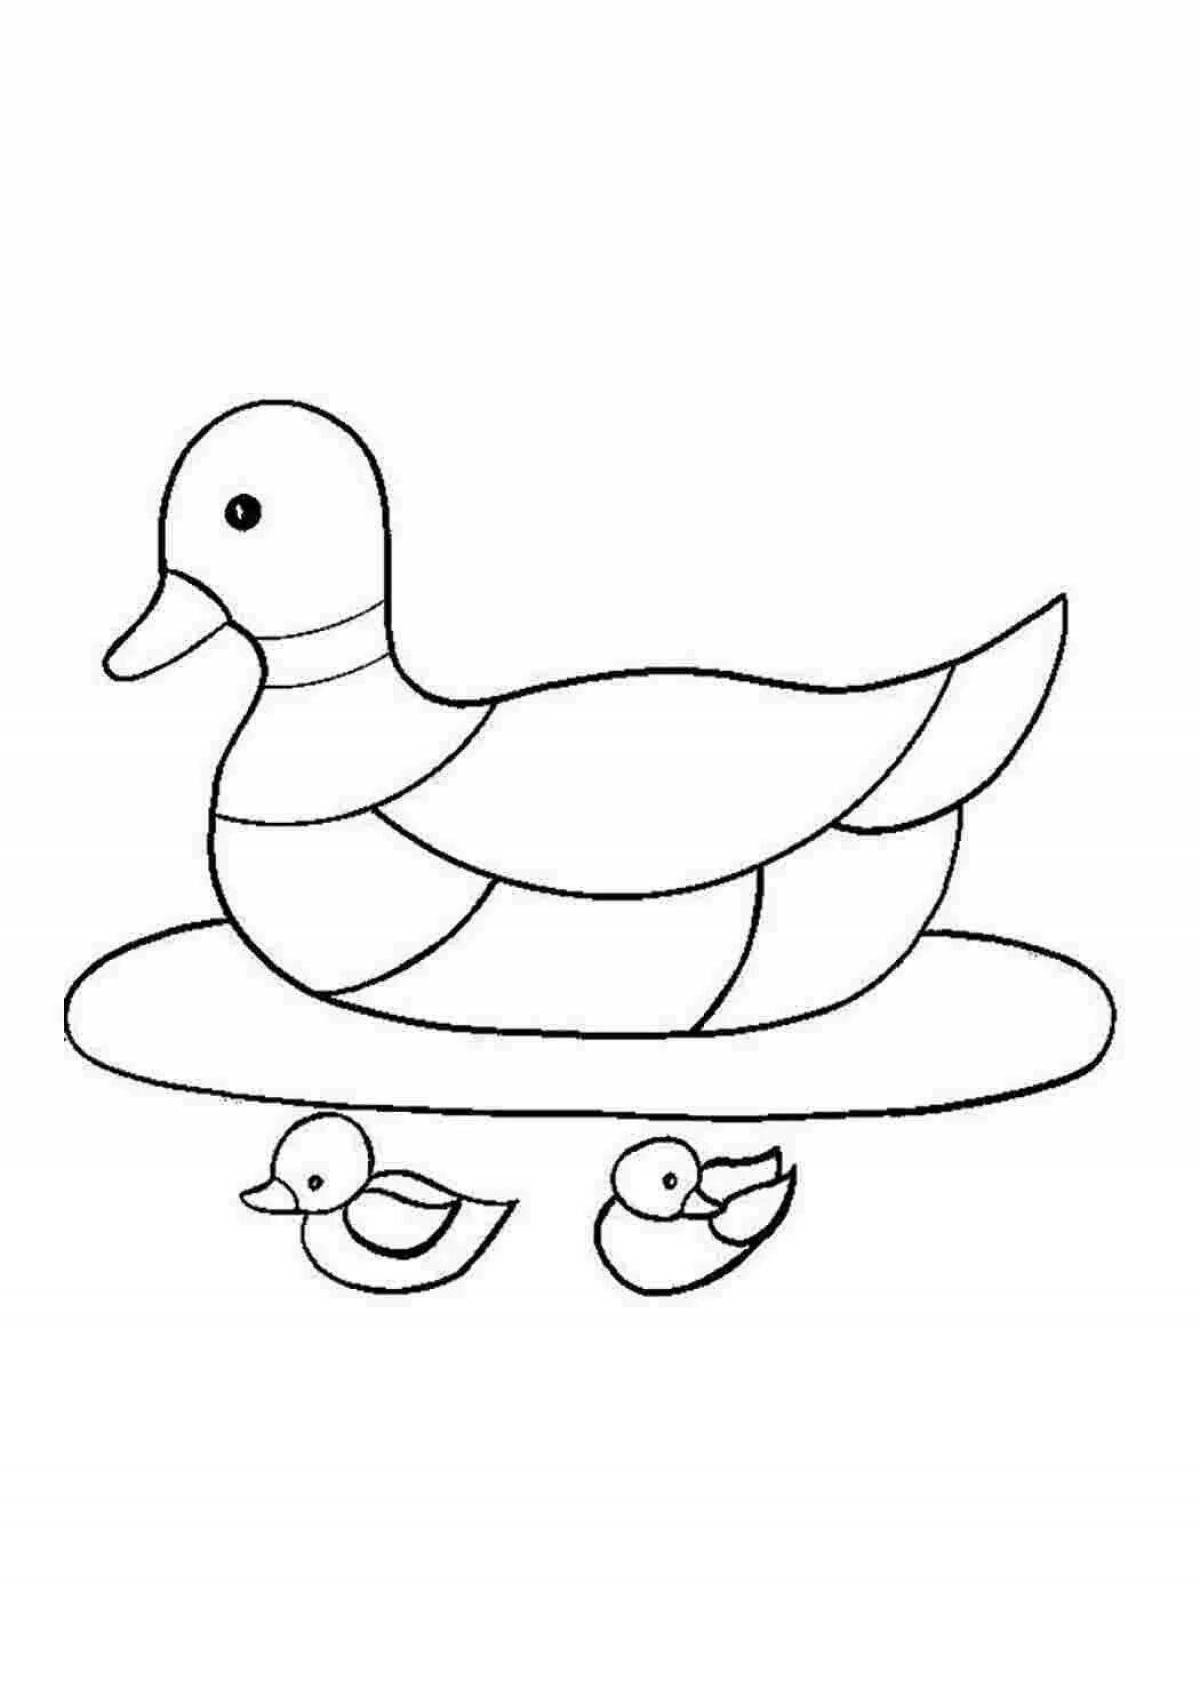 Sweet duck coloring page